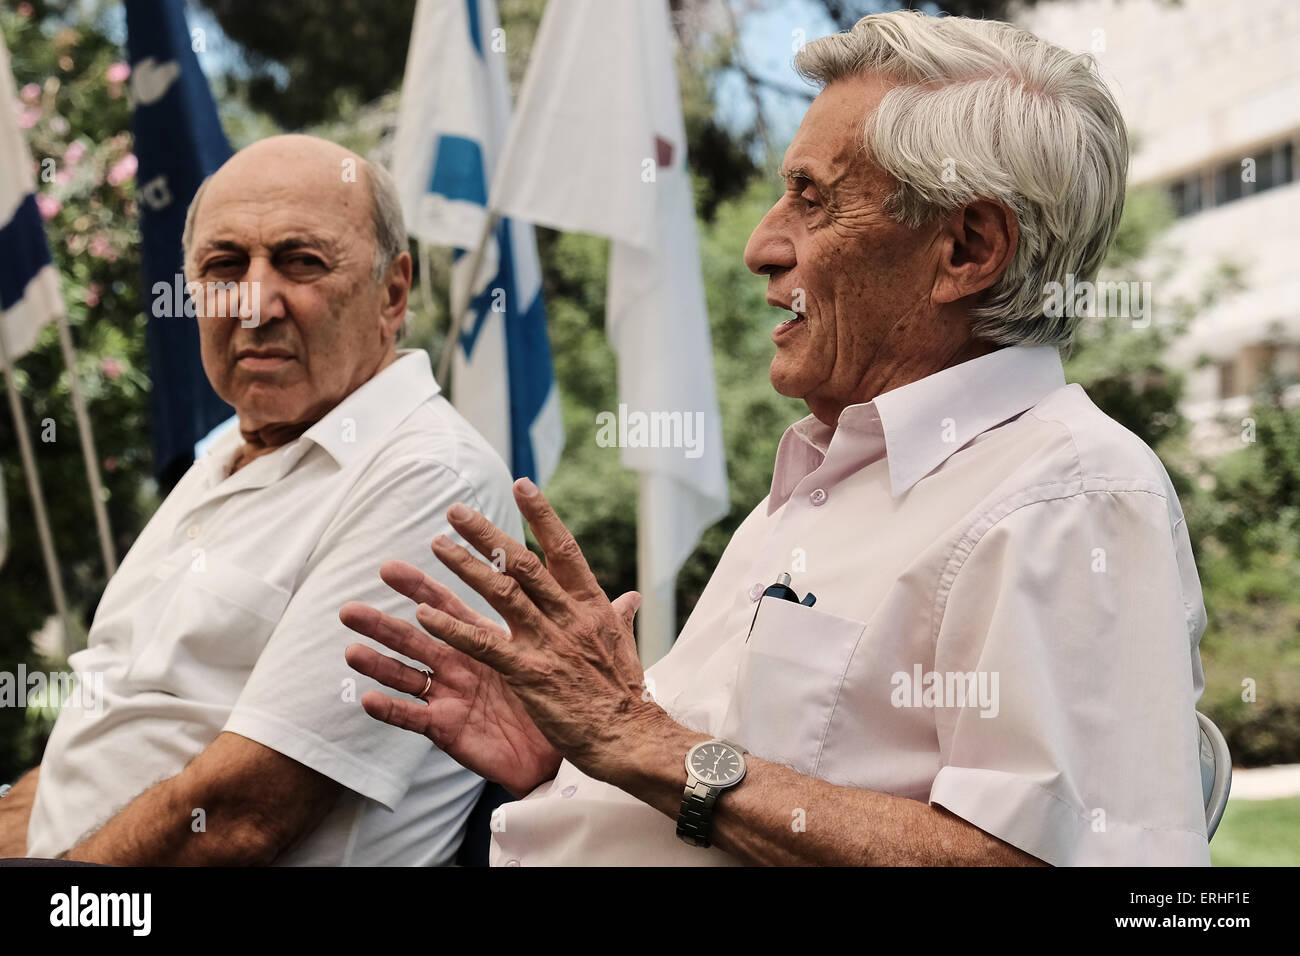 Jerusalem, Israel. 3rd June, 2015. Prof. HANOCH GUTFREUND (R), former University Rector and President, Director of the Einstein Center and the appointee responsible for Einstein's intellectual property, speaks of the importance of Einstein's contributions to mankind as sculptor GEORGY FRANGULYAN (C) looks on. The Hebrew University ceremoniously unveiled a 2.5 meter tall bronze statue of Albert Einstein on the Edmond J. Safra Campus marking 100 years since Einstein's General Theory of Relativity published and 60 years since his death. Credit:  Nir Alon/Alamy Live News Stock Photo